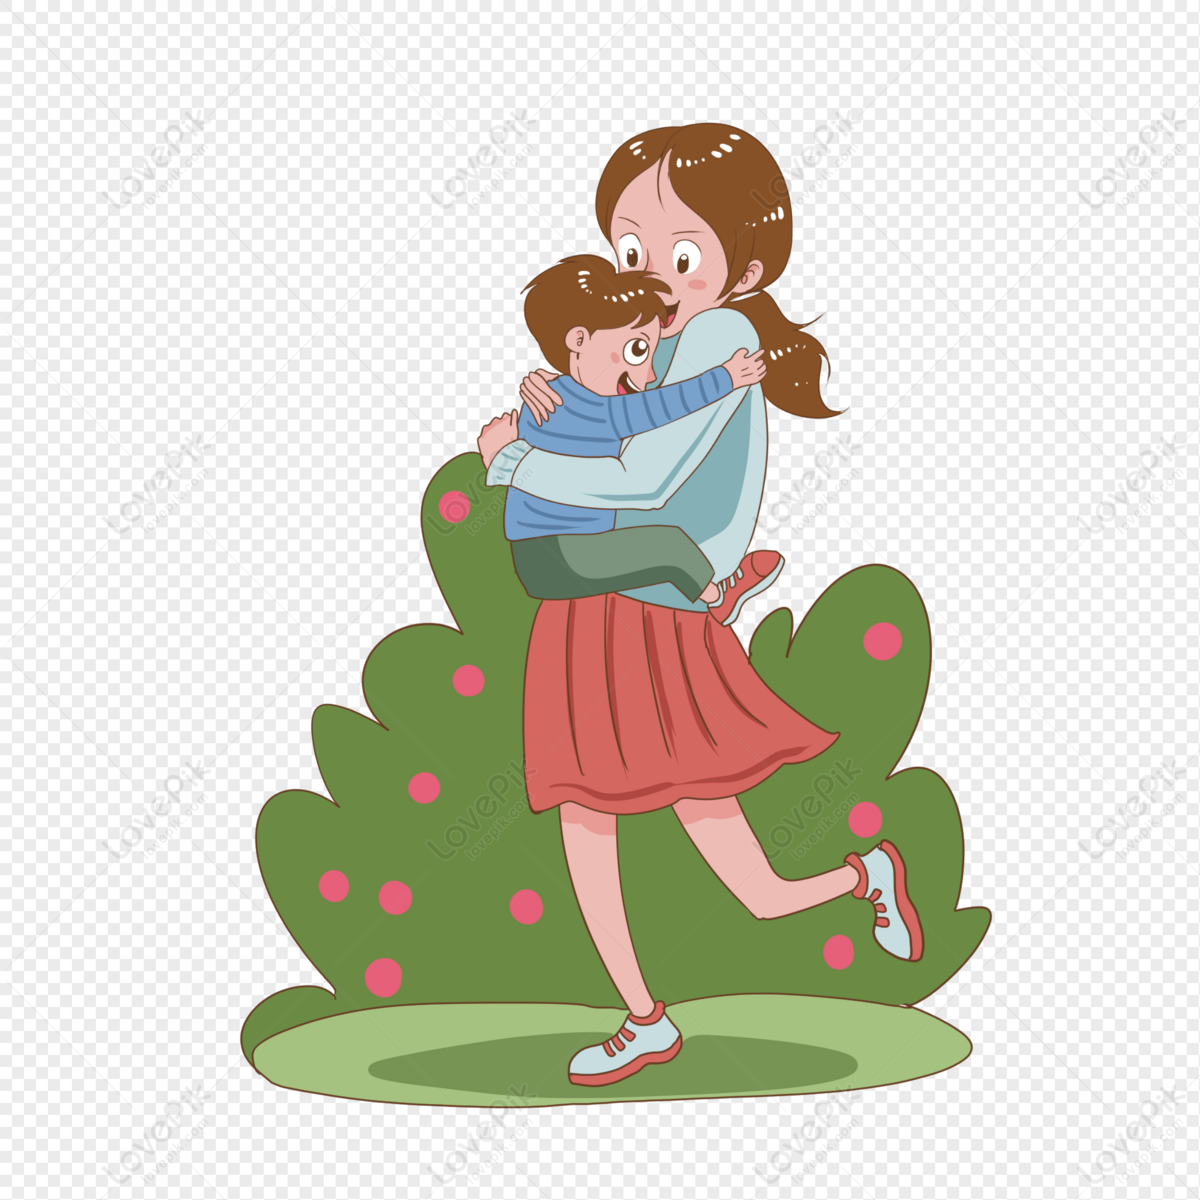 Mother Holding A Child PNG Picture And Clipart Image For Free Download ...